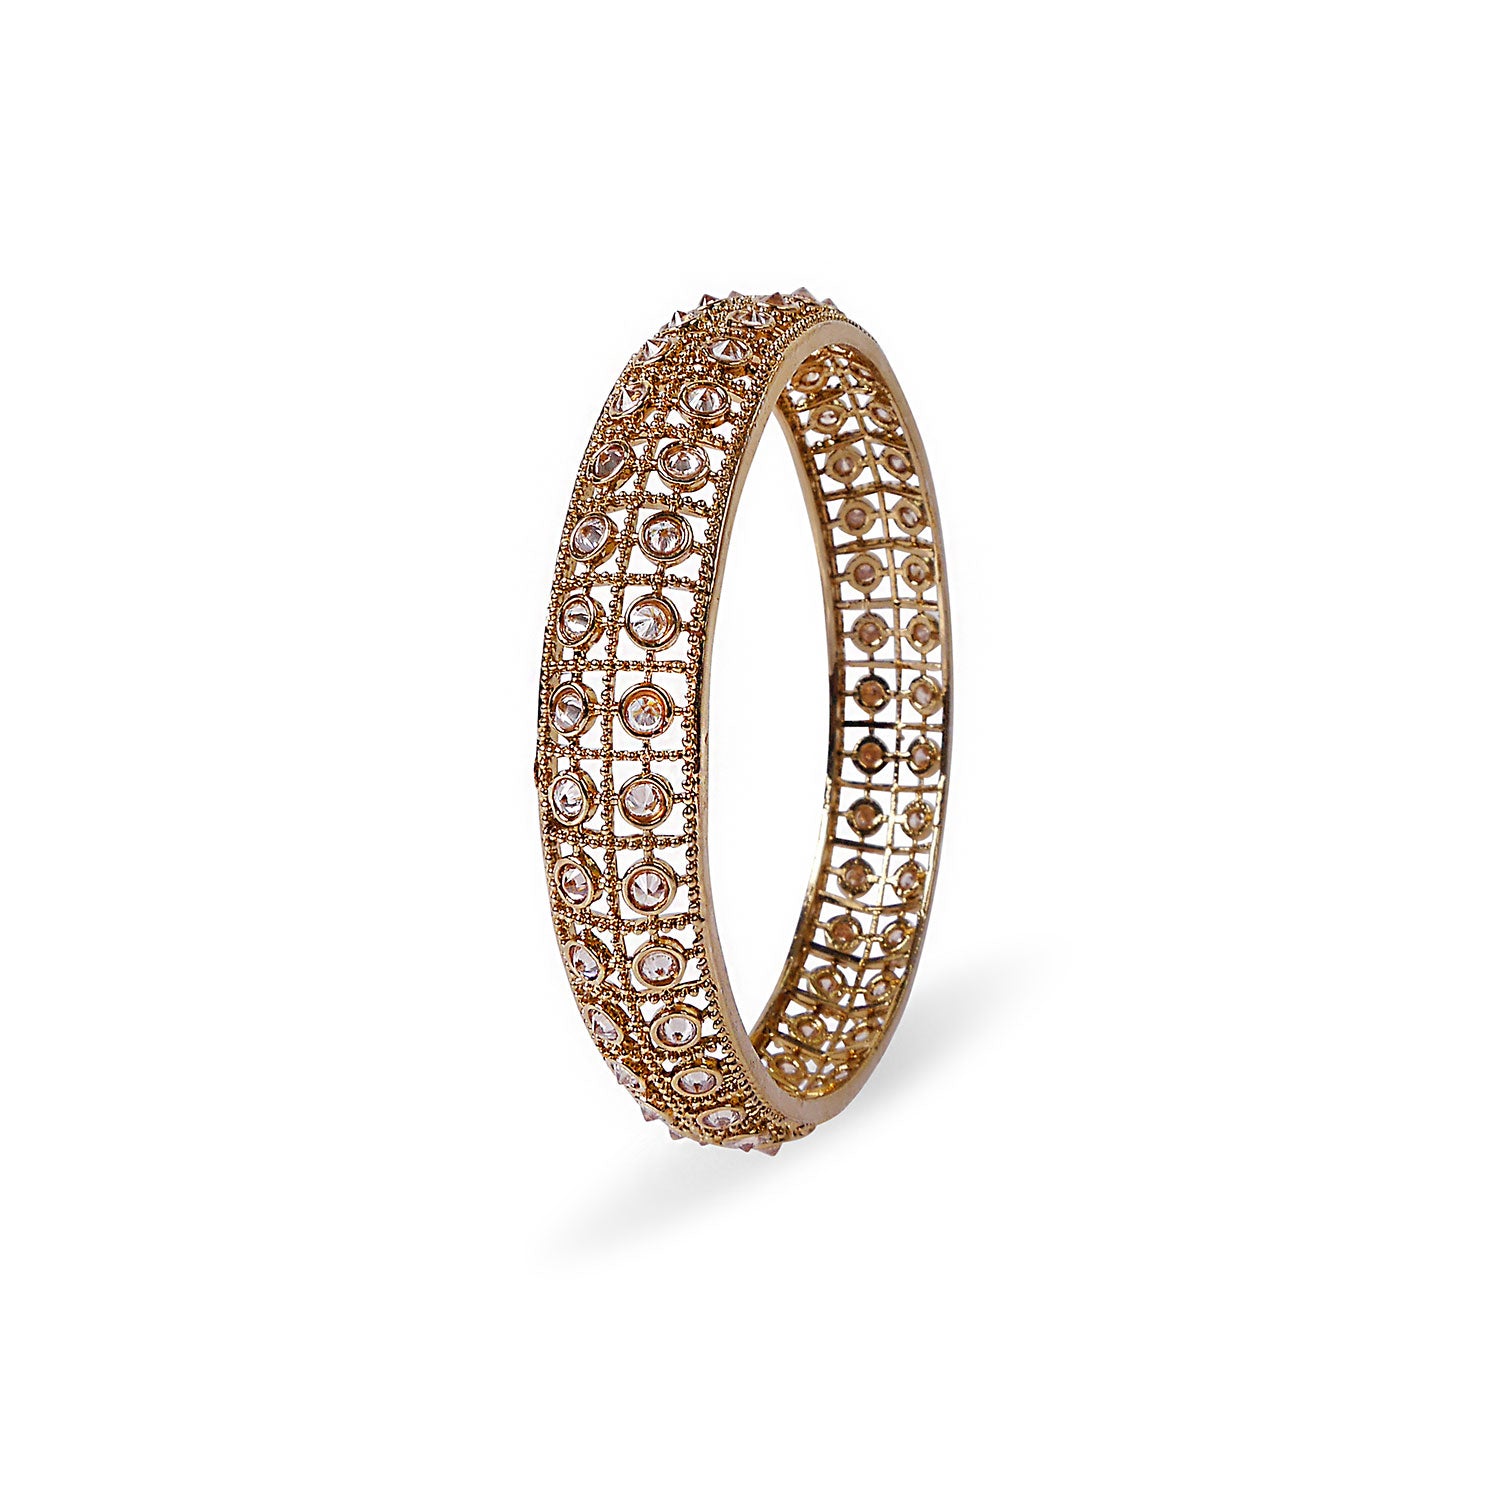 Suman Indian Bangle in Antique Gold